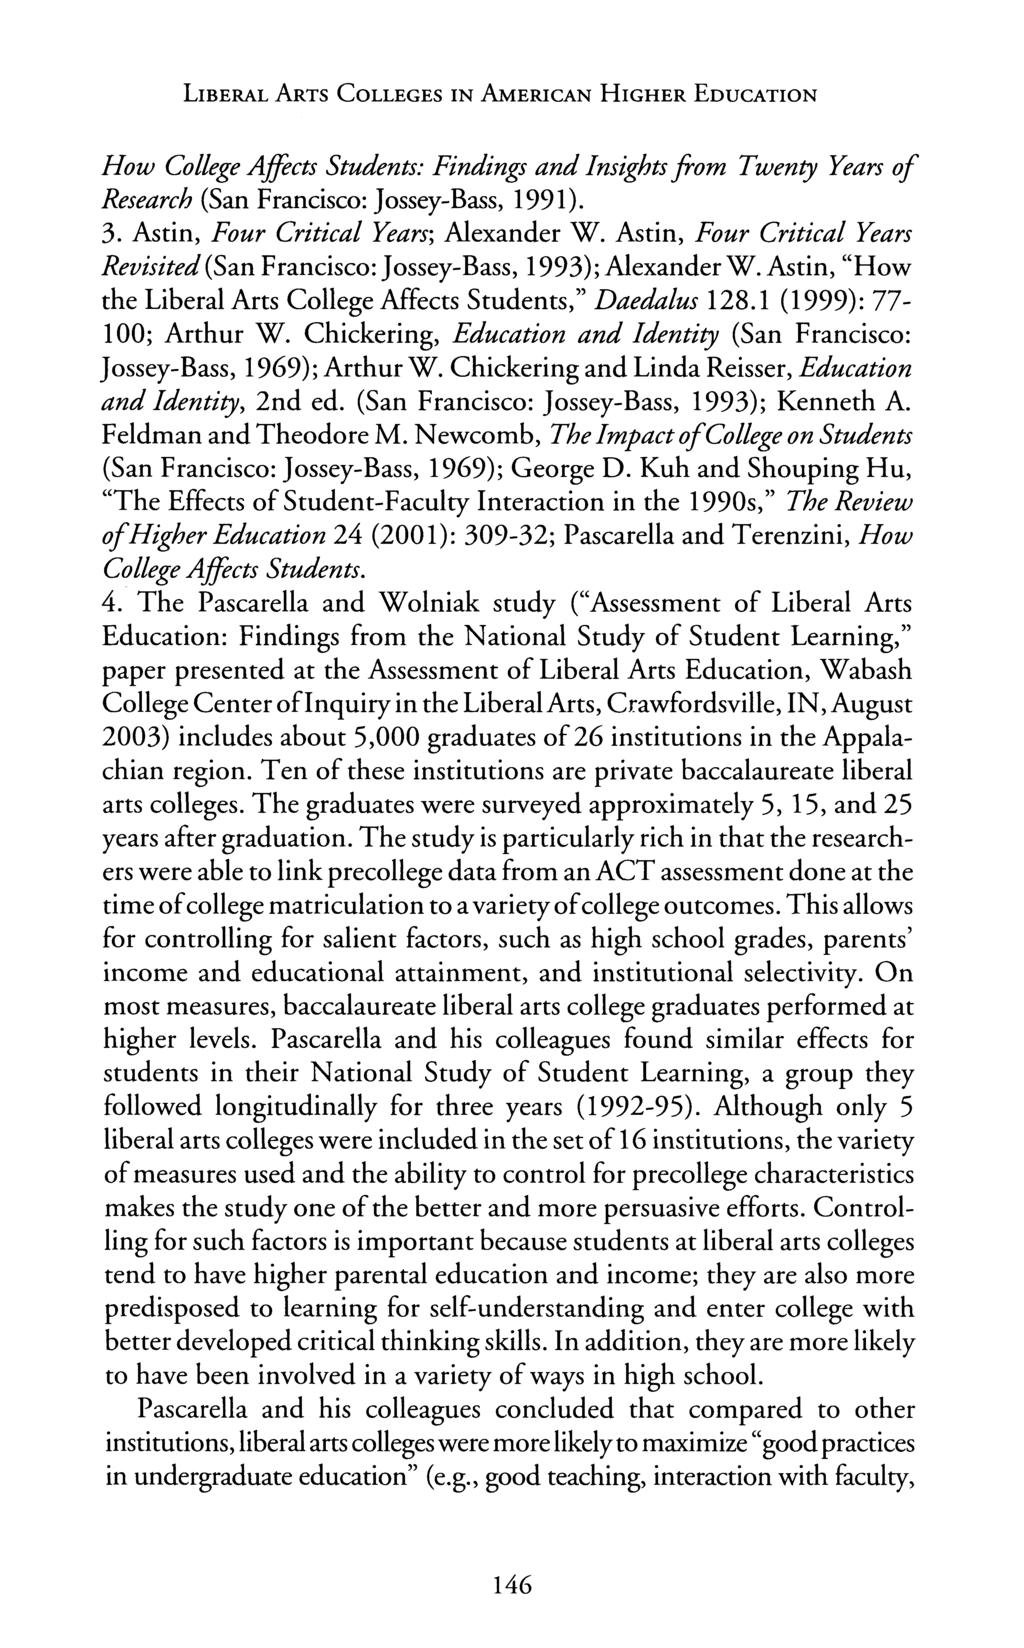 LIBERAL ARTS COLLEGES IN AMERICAN HIGHER EDUCATION How College Affects Students: Findings and Insights from Twenty Years of Research (San Francisco: Jossey-Bass, 1991). 3.